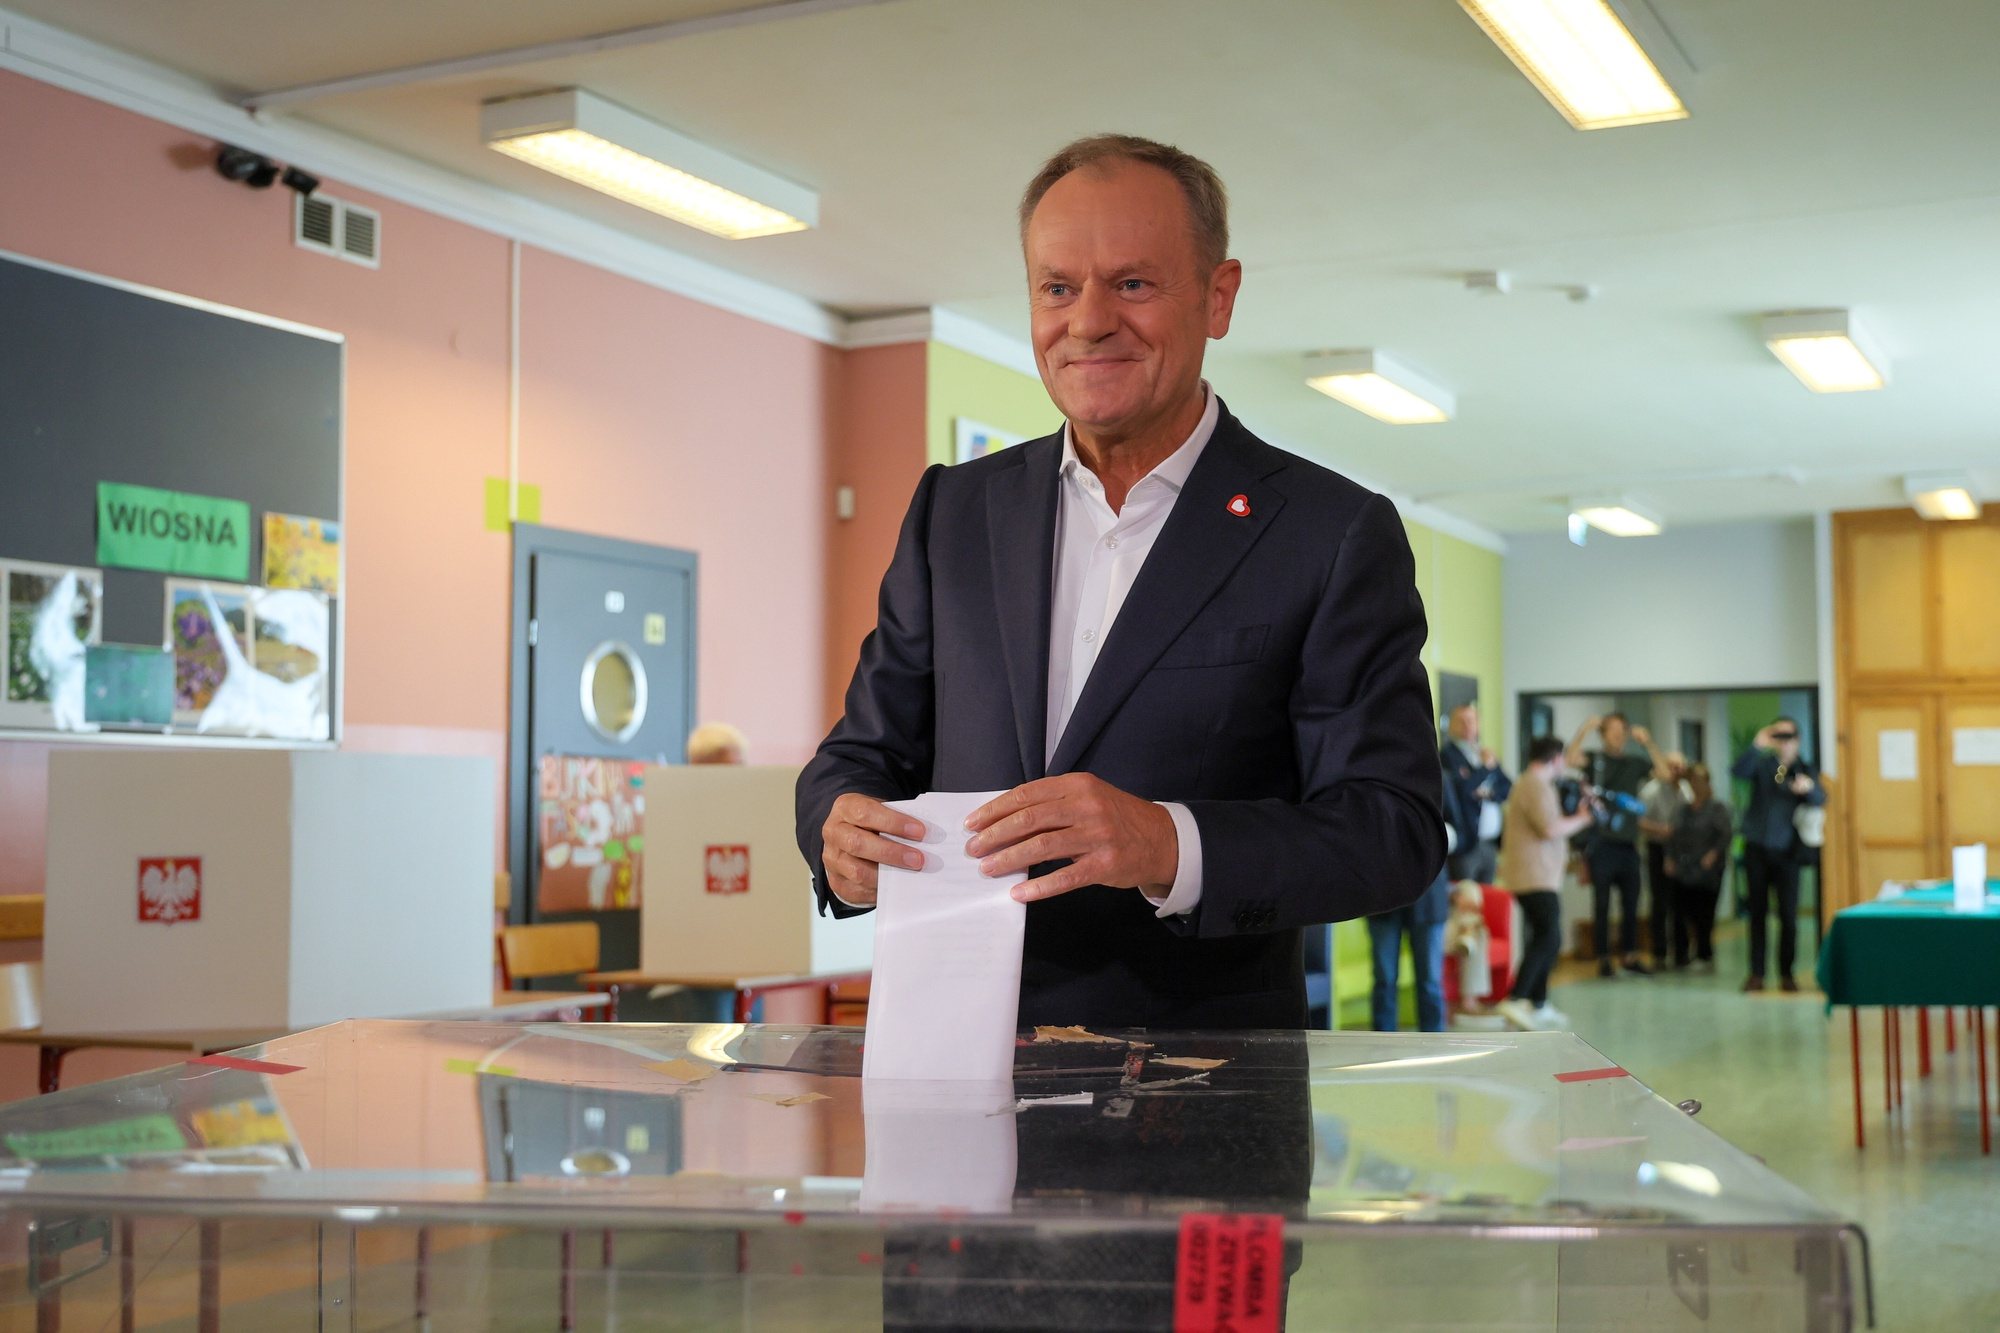 epa11399055 Prime Minister Donald Tusk votes in the European elections, at a polling station at Elementary School No. 12 in Warsaw, Poland, 09 June 2024. The European Parliament elections take place across EU member states from 06 to 09 June 2024.  EPA/PAWEL SUPERNAK  POLAND OUT